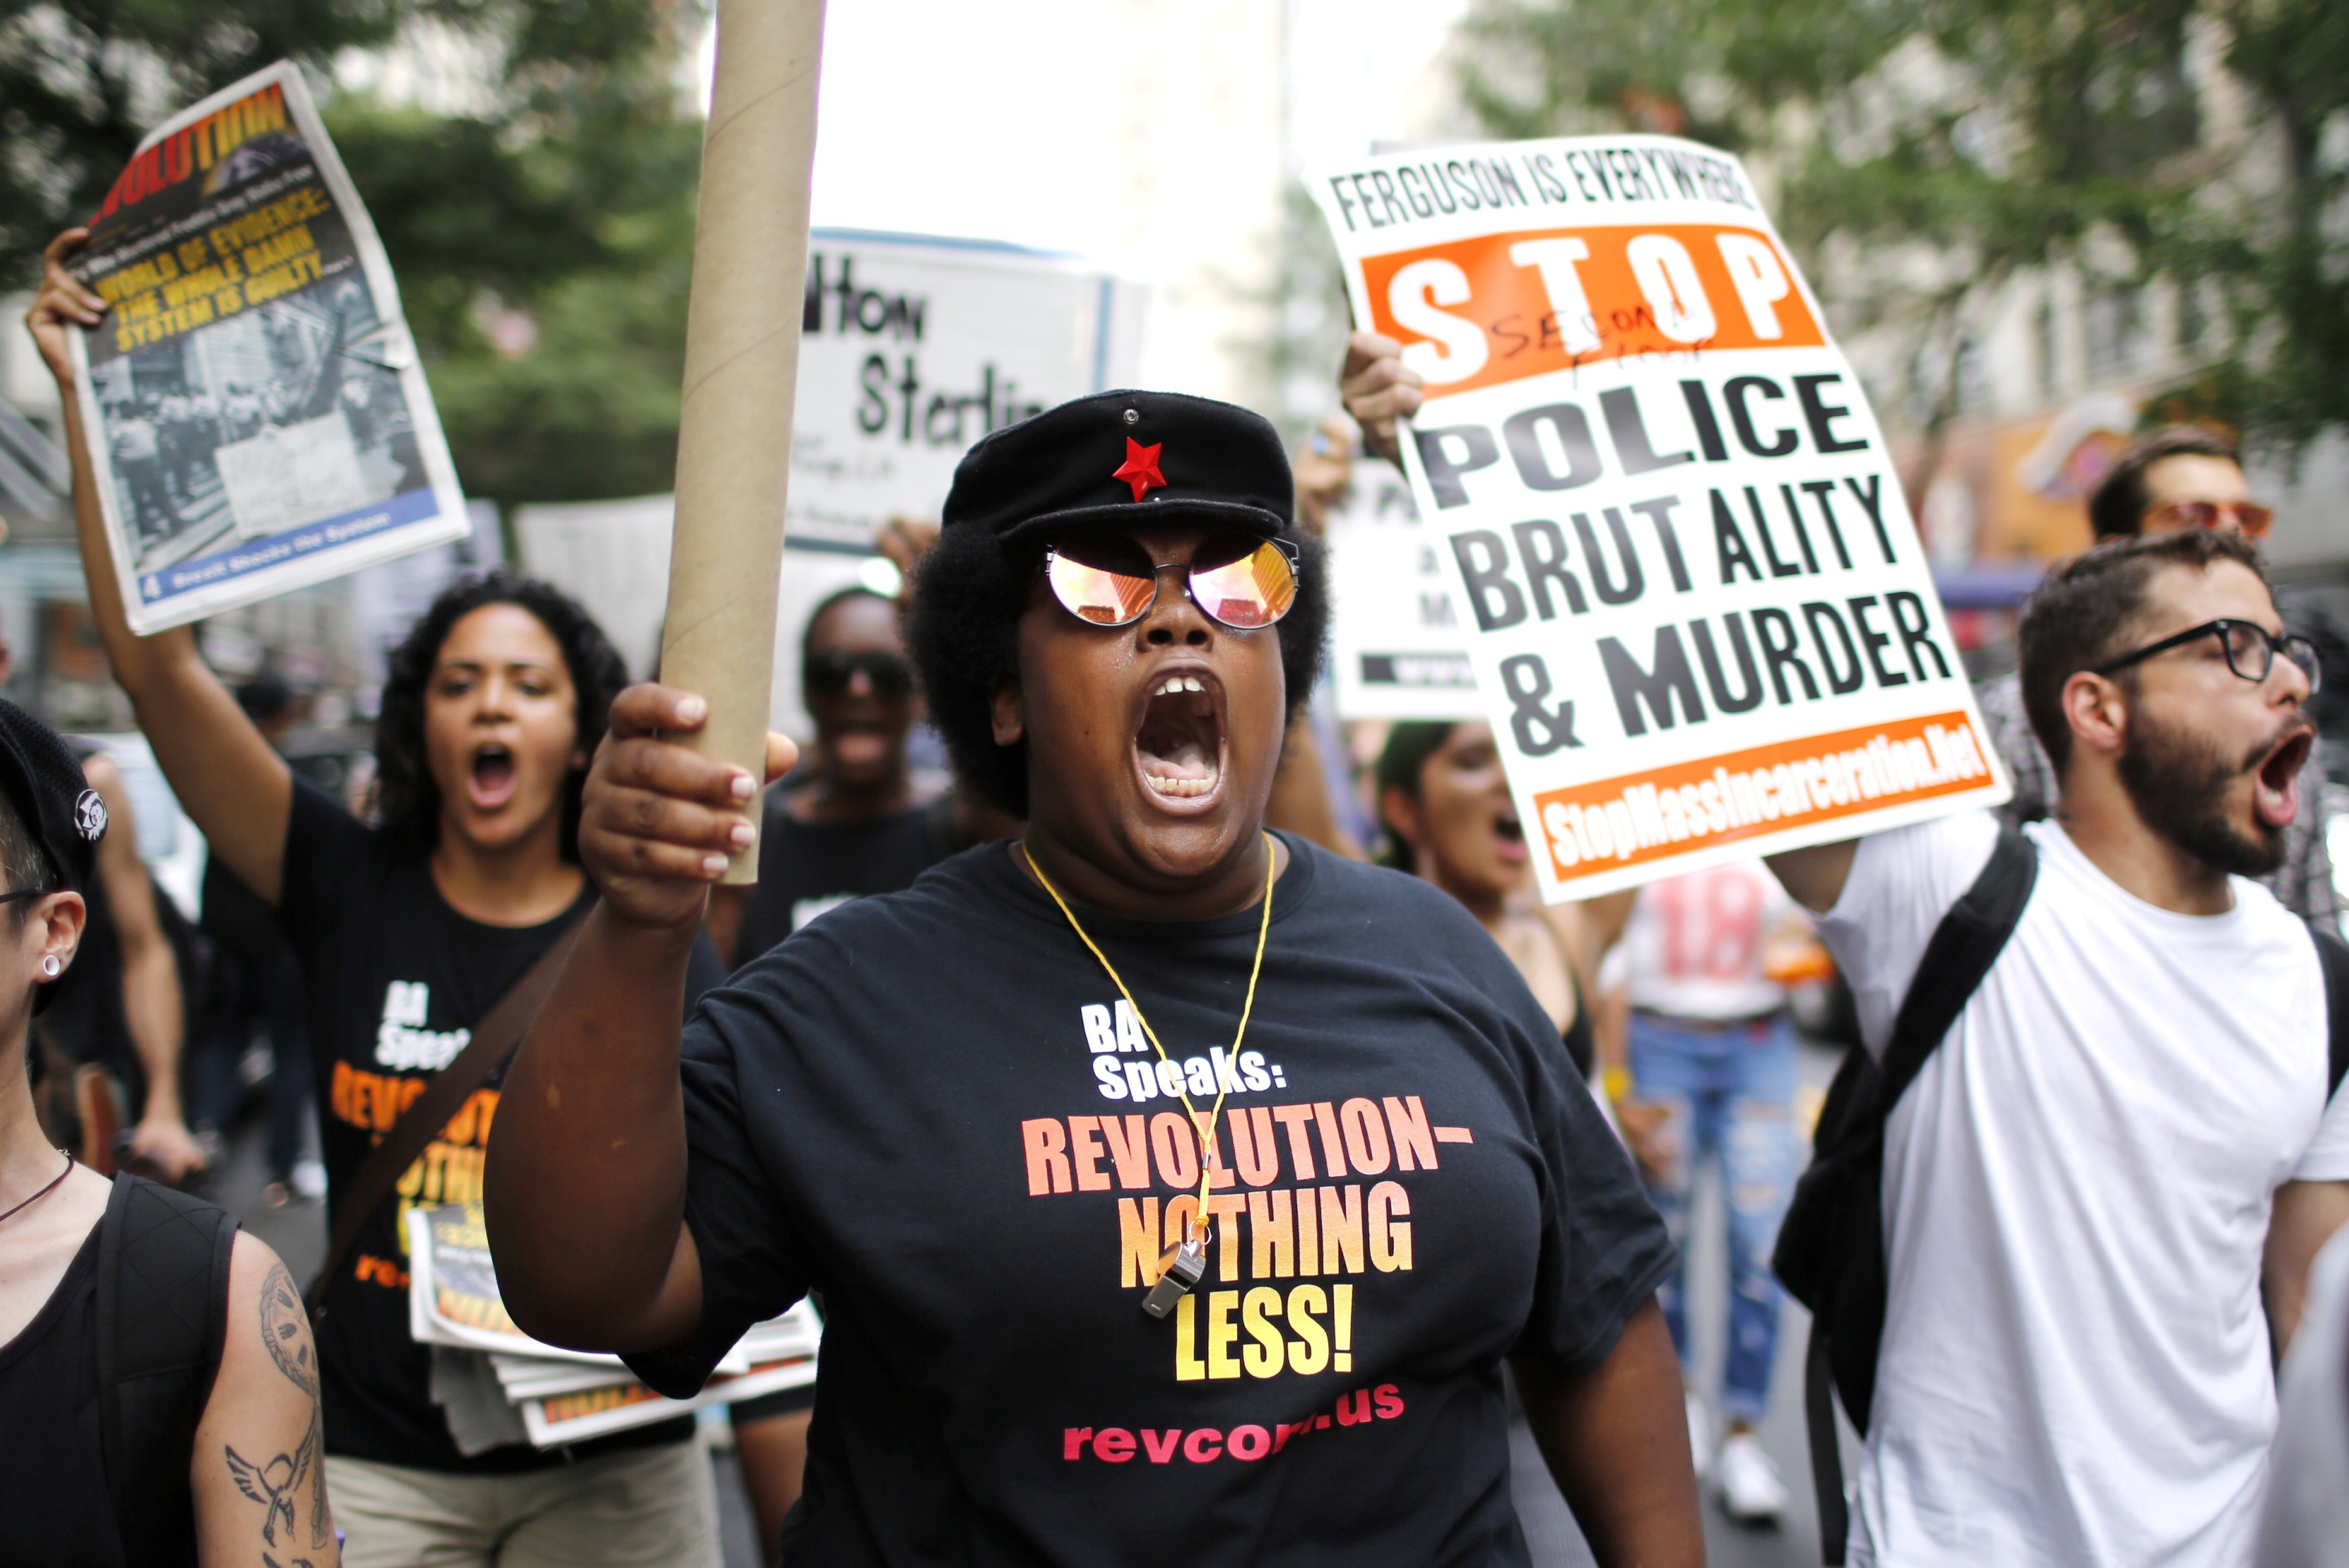 People take part in a protest for the killing of Alton Sterling and Philando Castile during a march along Manhattan's streets in New York